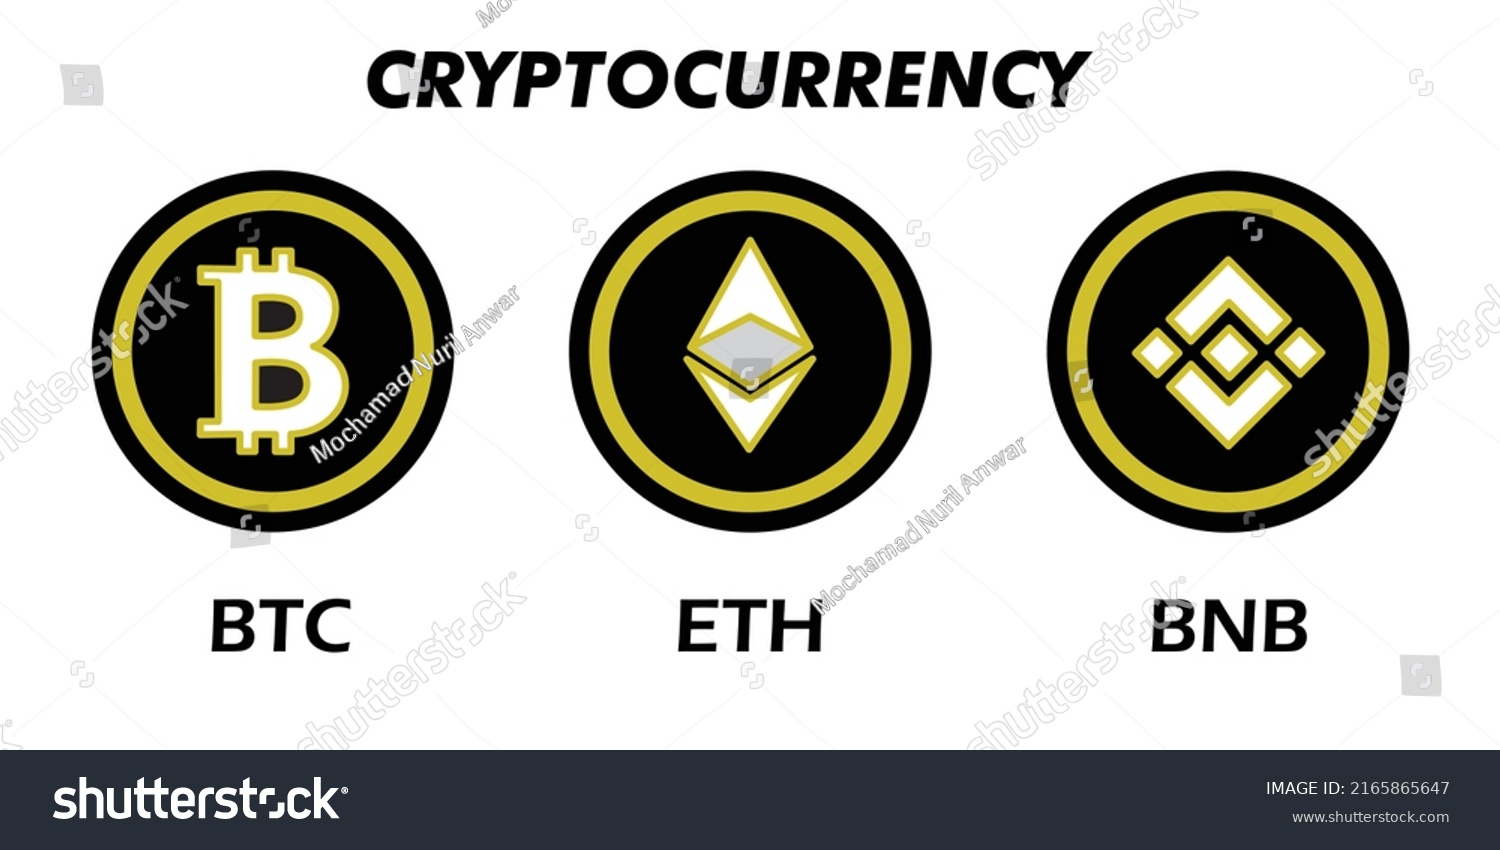 SVG of BTC ETH BNB CRYPTOCURRENCY LOGO CAN BE USED FOR COMPANY OR COMMUNITY LOGO svg